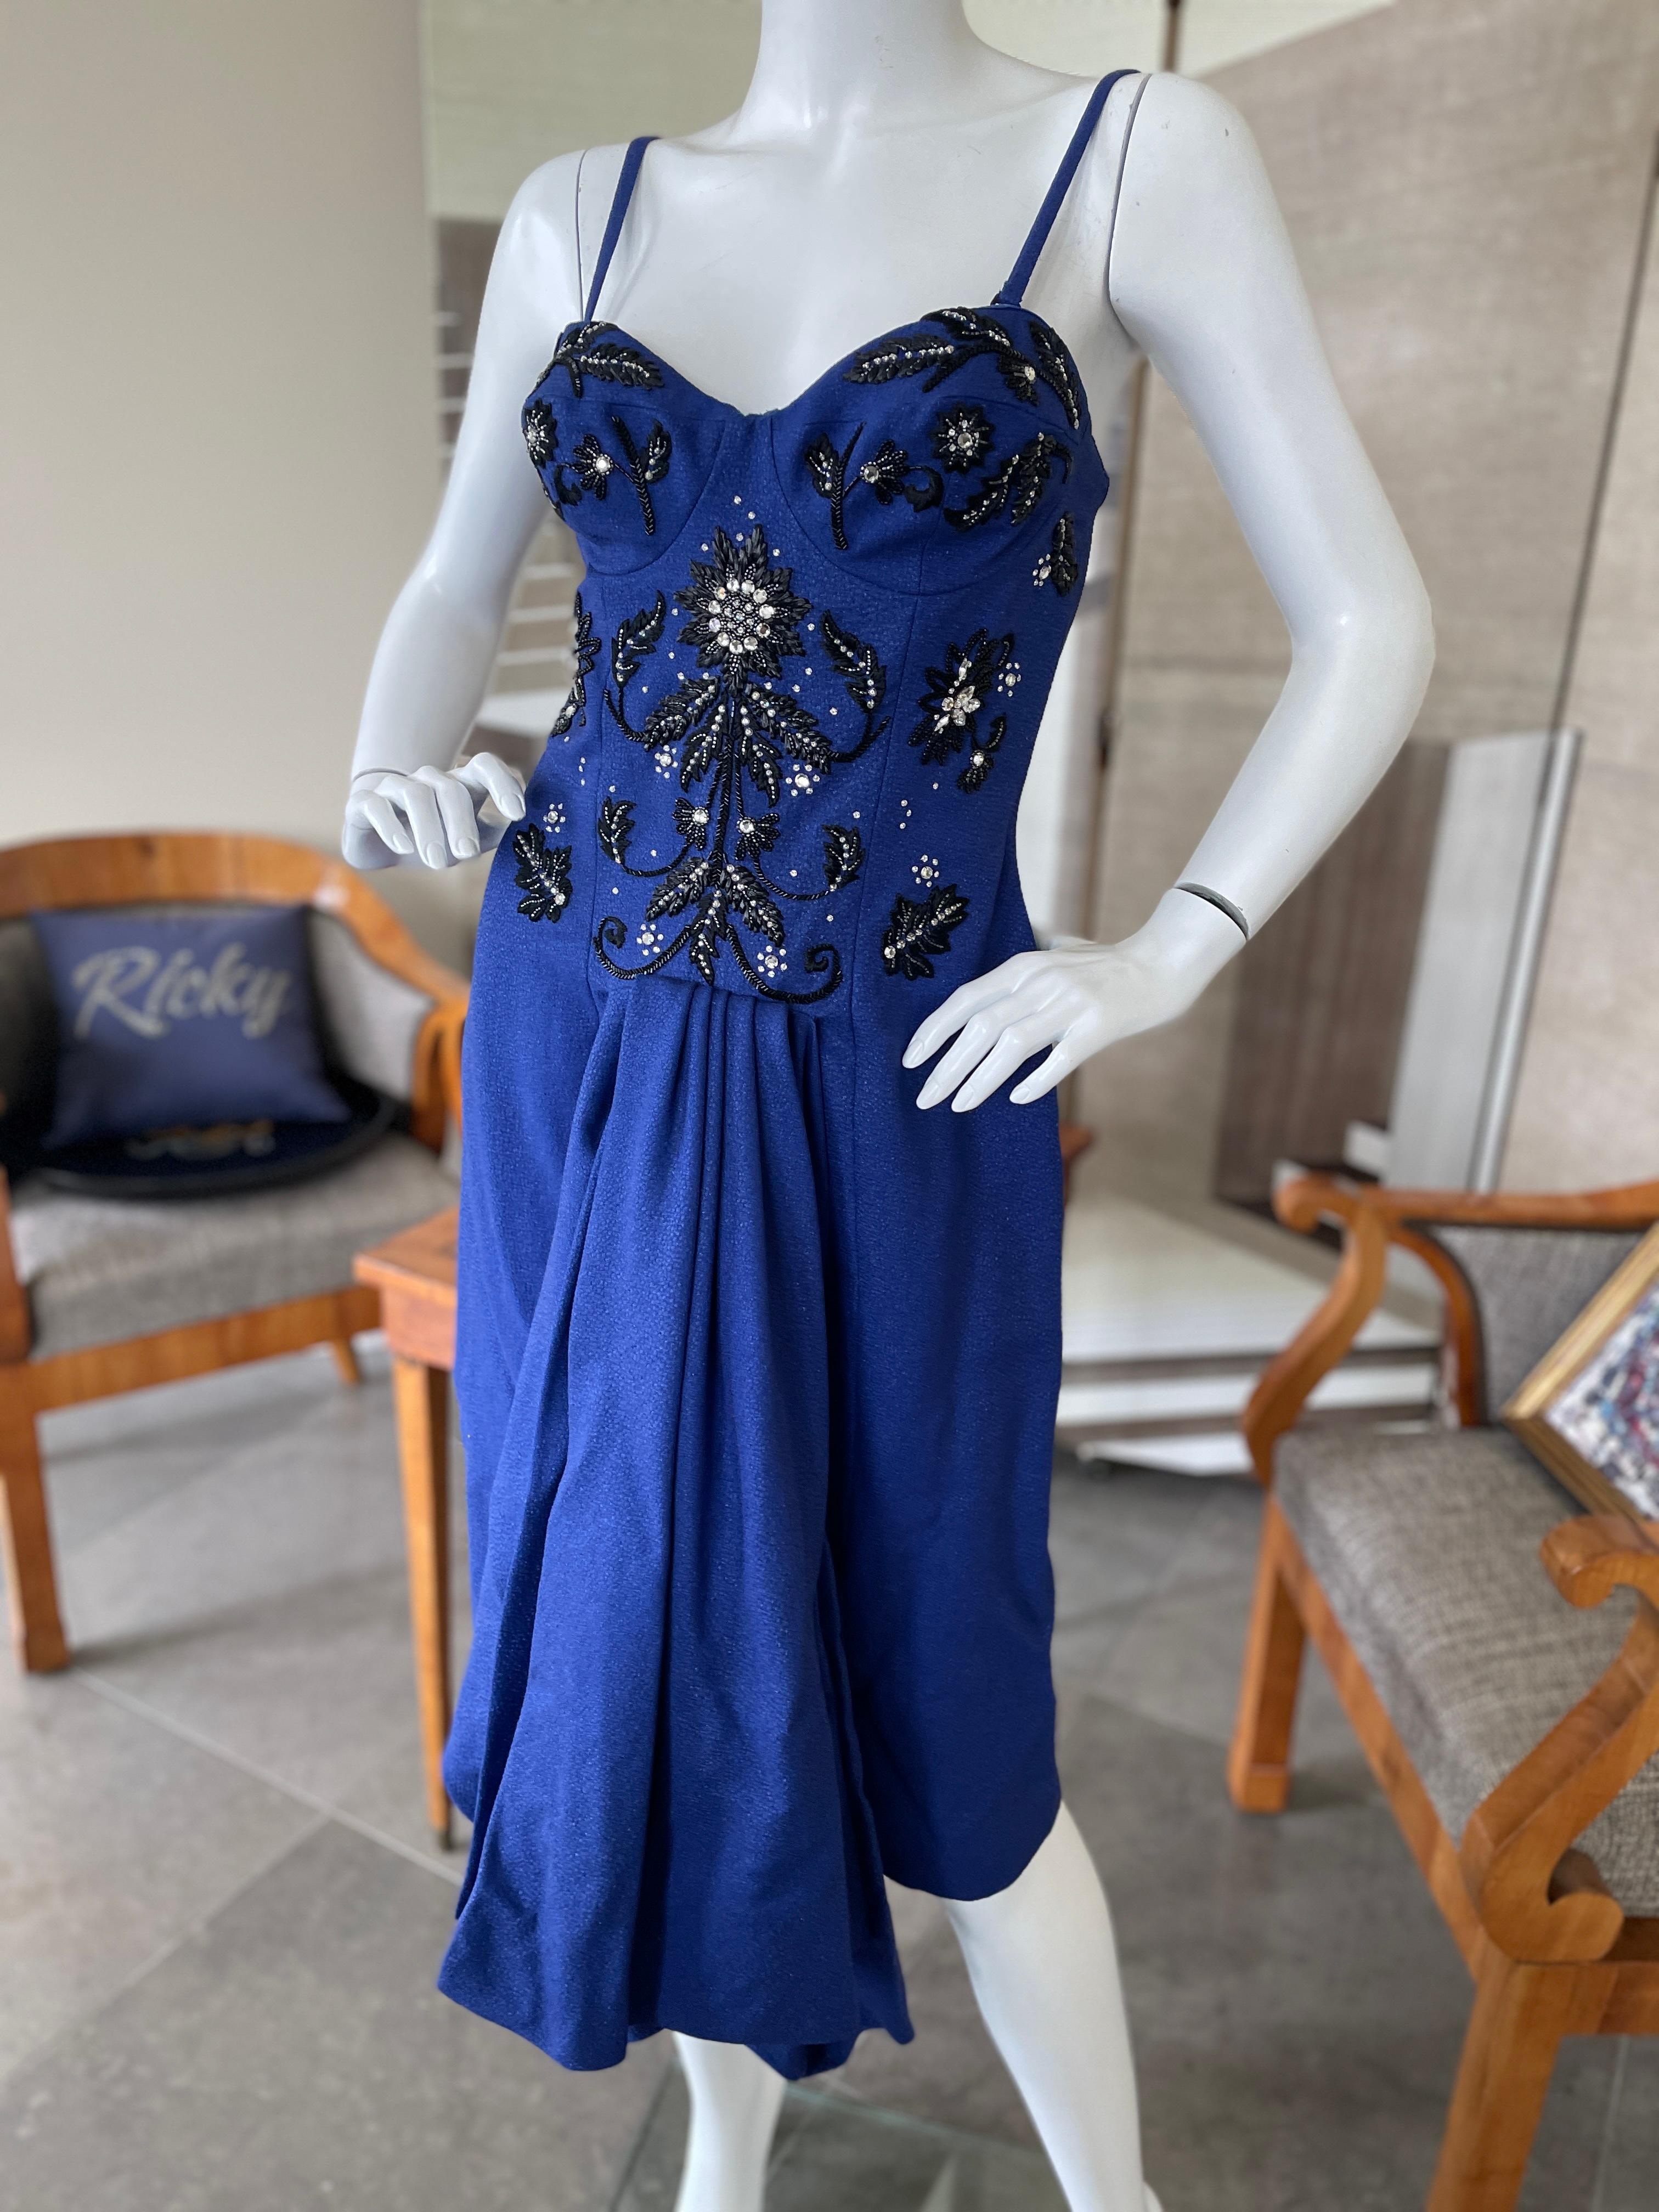 Christian Dior by John Galliano Fall 2007 Blue Dress with Crystal Details In Excellent Condition For Sale In Cloverdale, CA